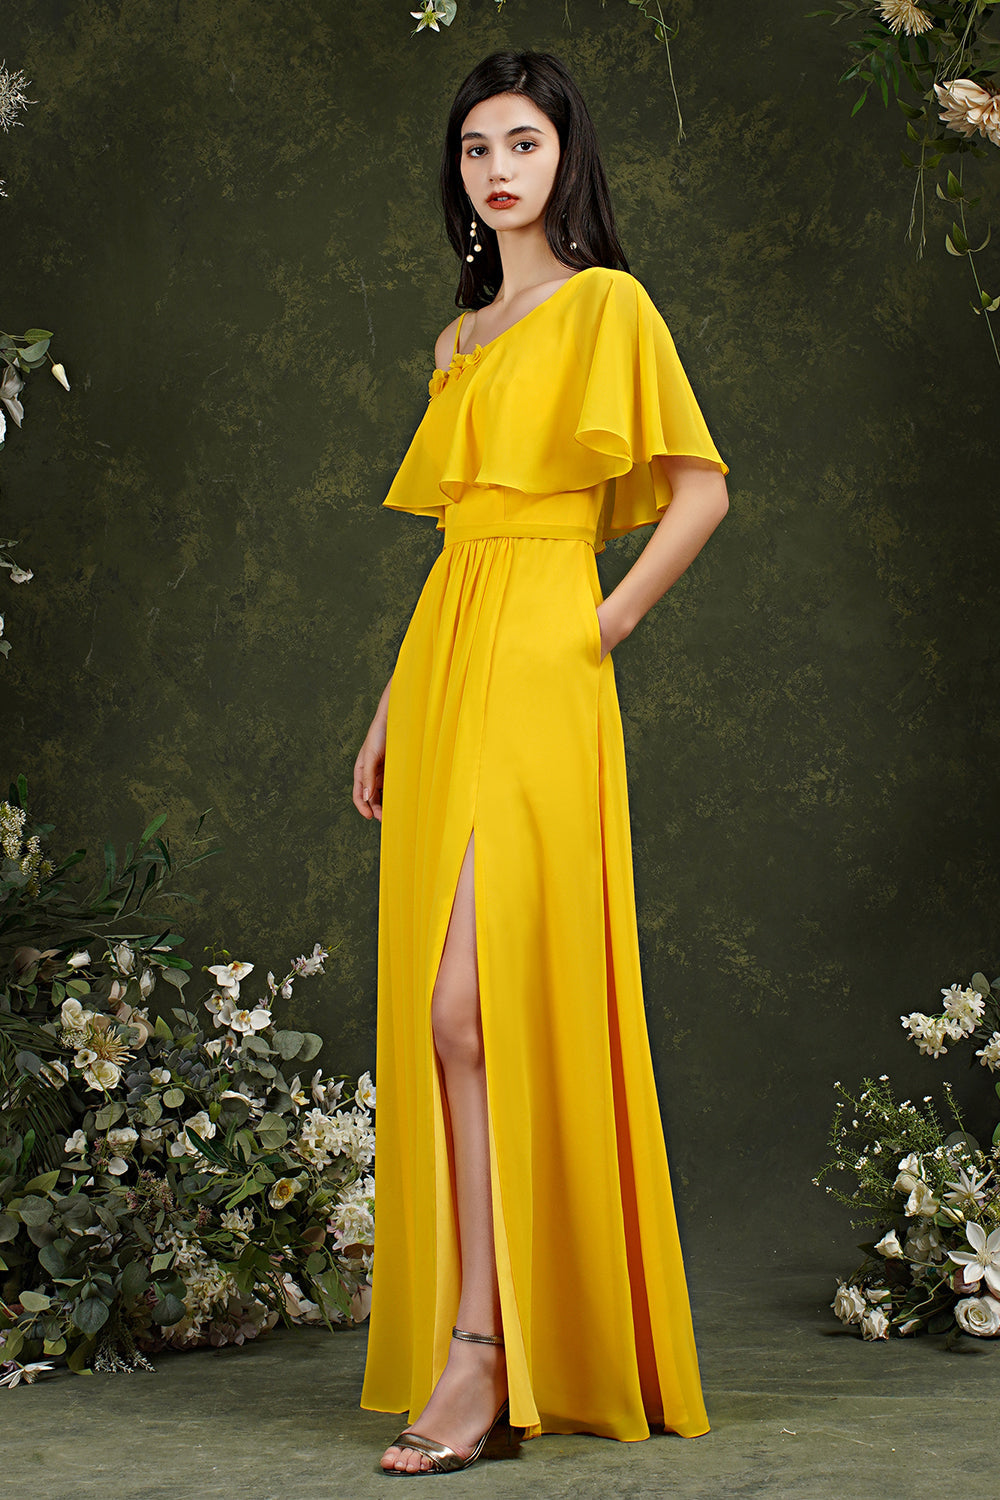 One Shoulder Ruffles Bridesmaid Dress Long With Slit